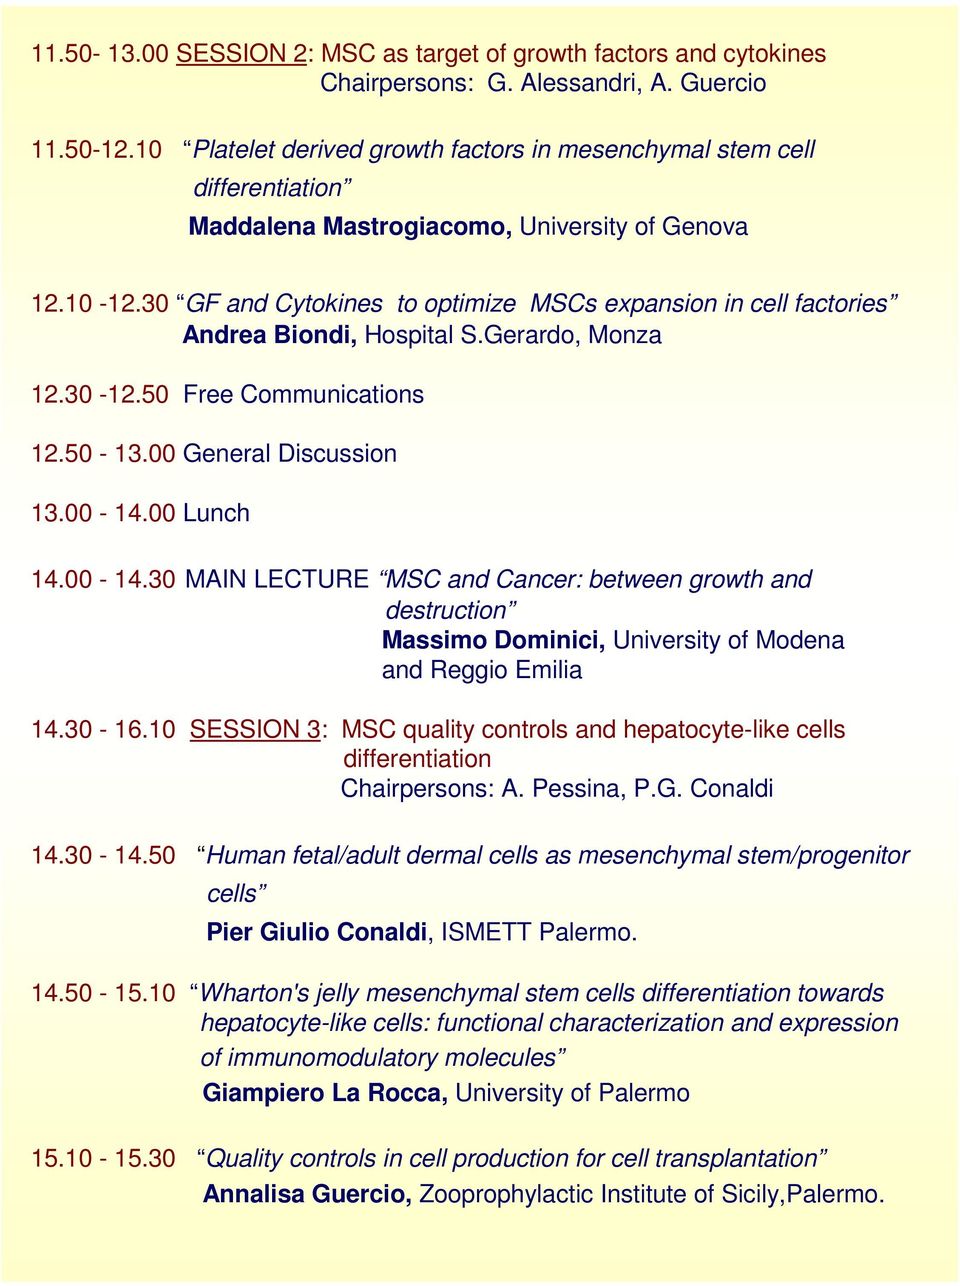 30 GF and Cytokines to optimize MSCs expansion in cell factories Andrea Biondi, Hospital S.Gerardo, Monza 12.30-12.50 Free Communications 12.50-13.00 General Discussion 13.00-14.